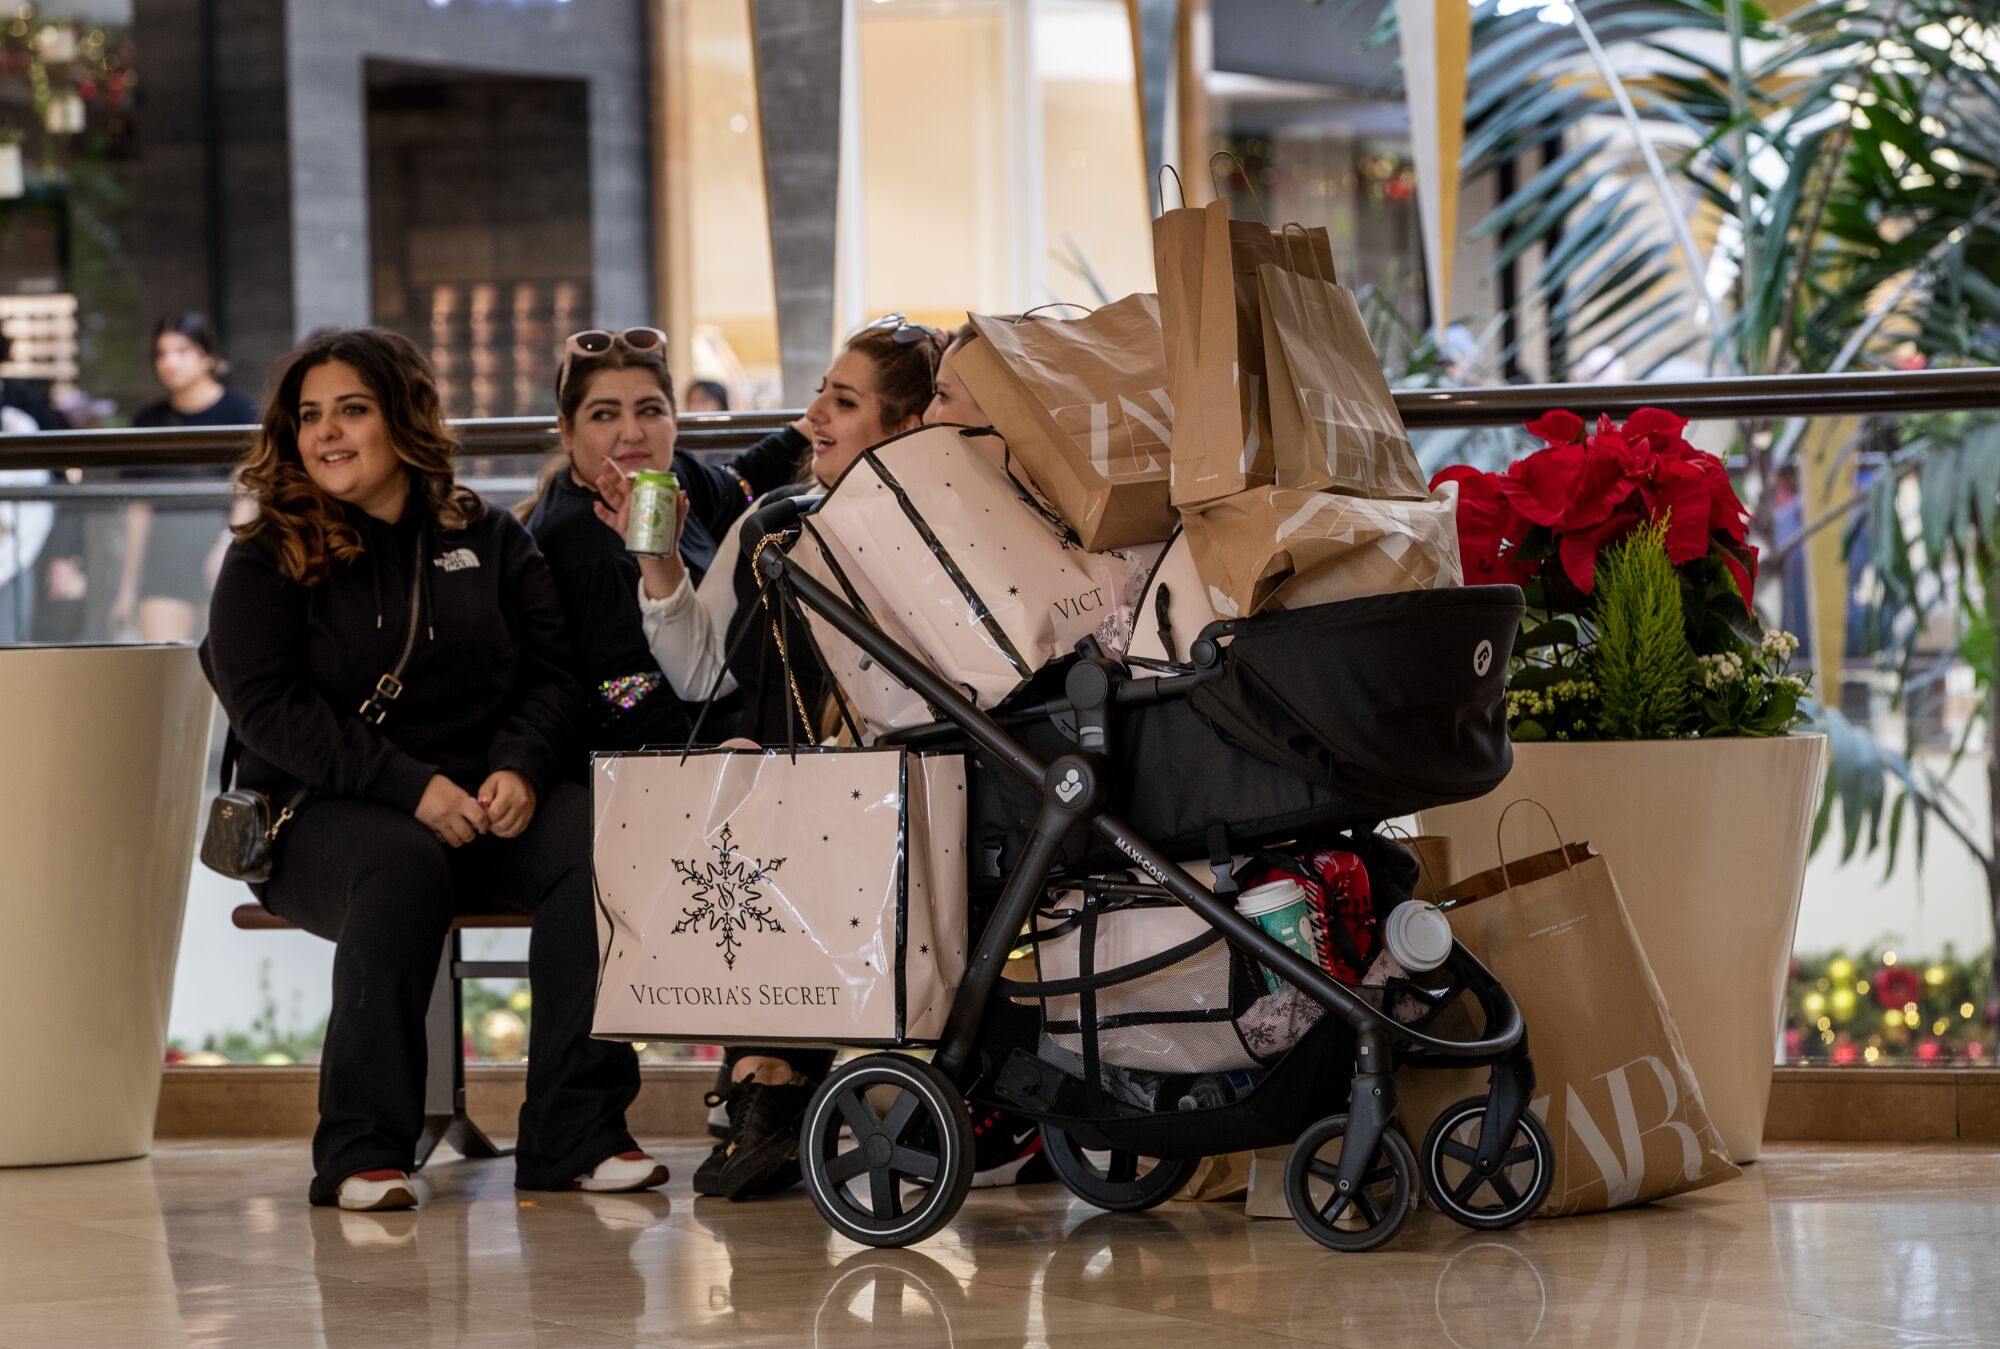 The Naybe family of Irvine takes a break after a shopping spree on Friday at South Coast Plaza in Costa Mesa.